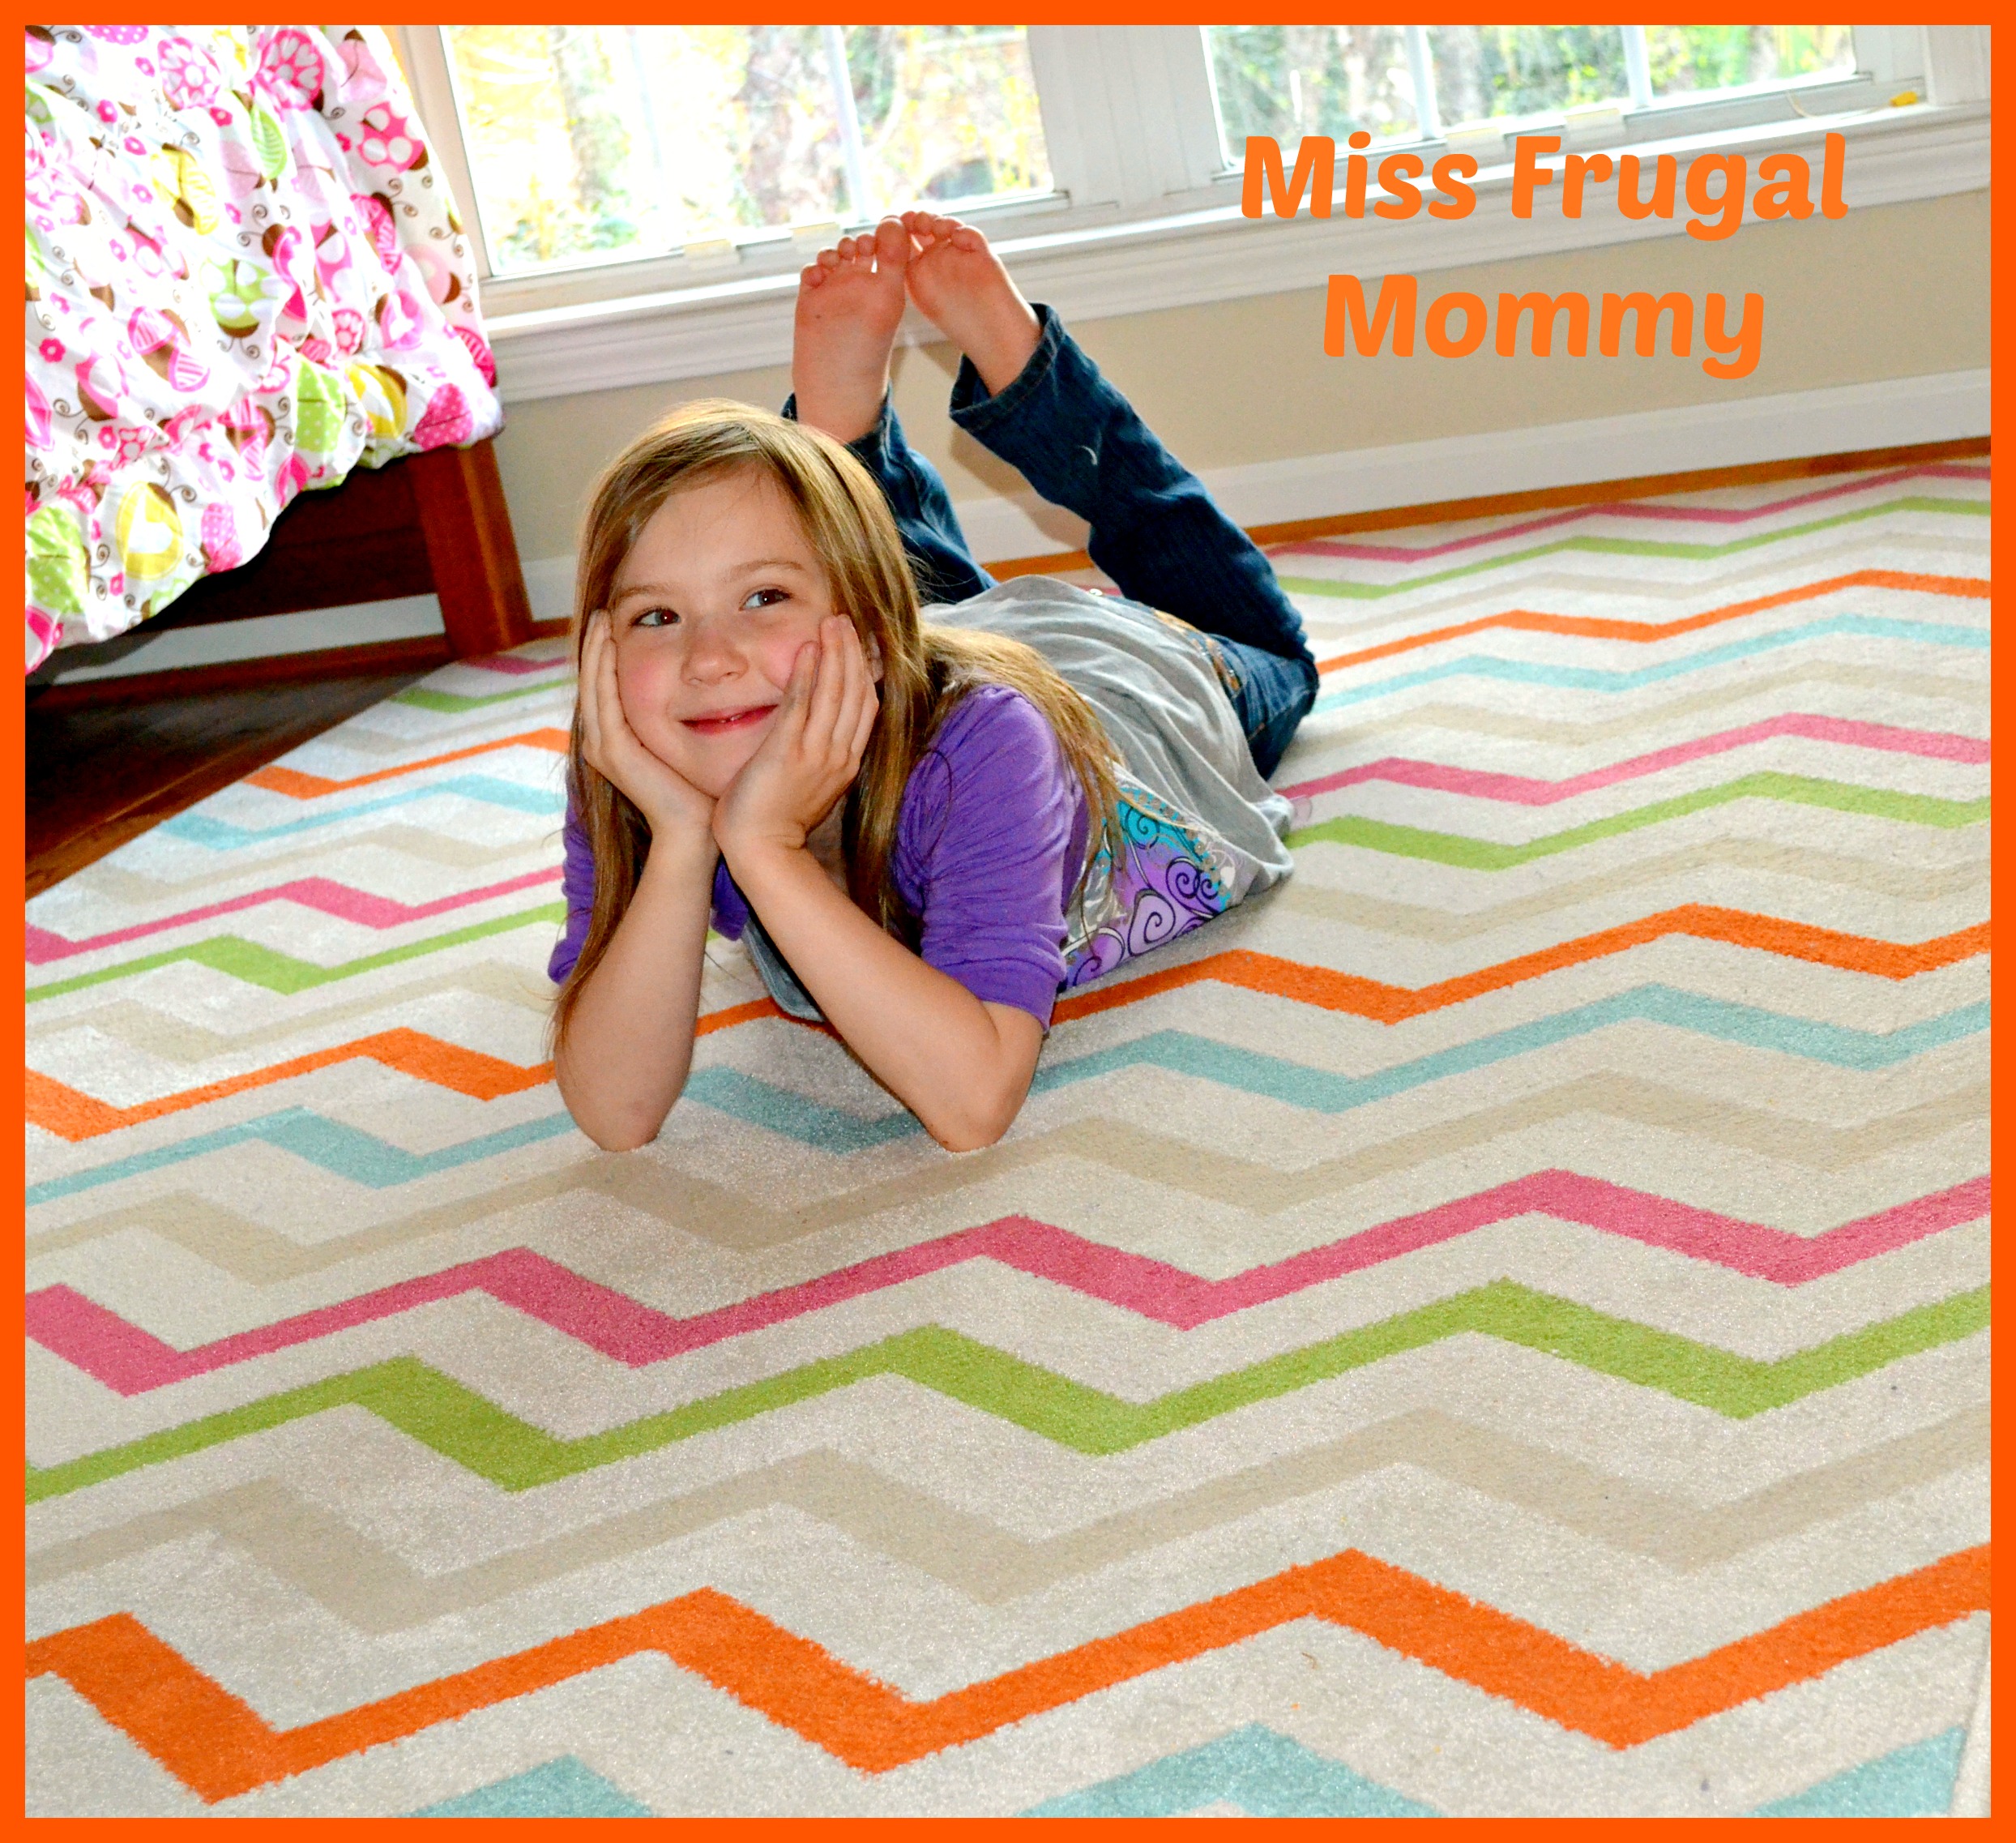 Brighten Up a Room With A New Rug: Mohawk Rug Review #ilovemymohawkrug